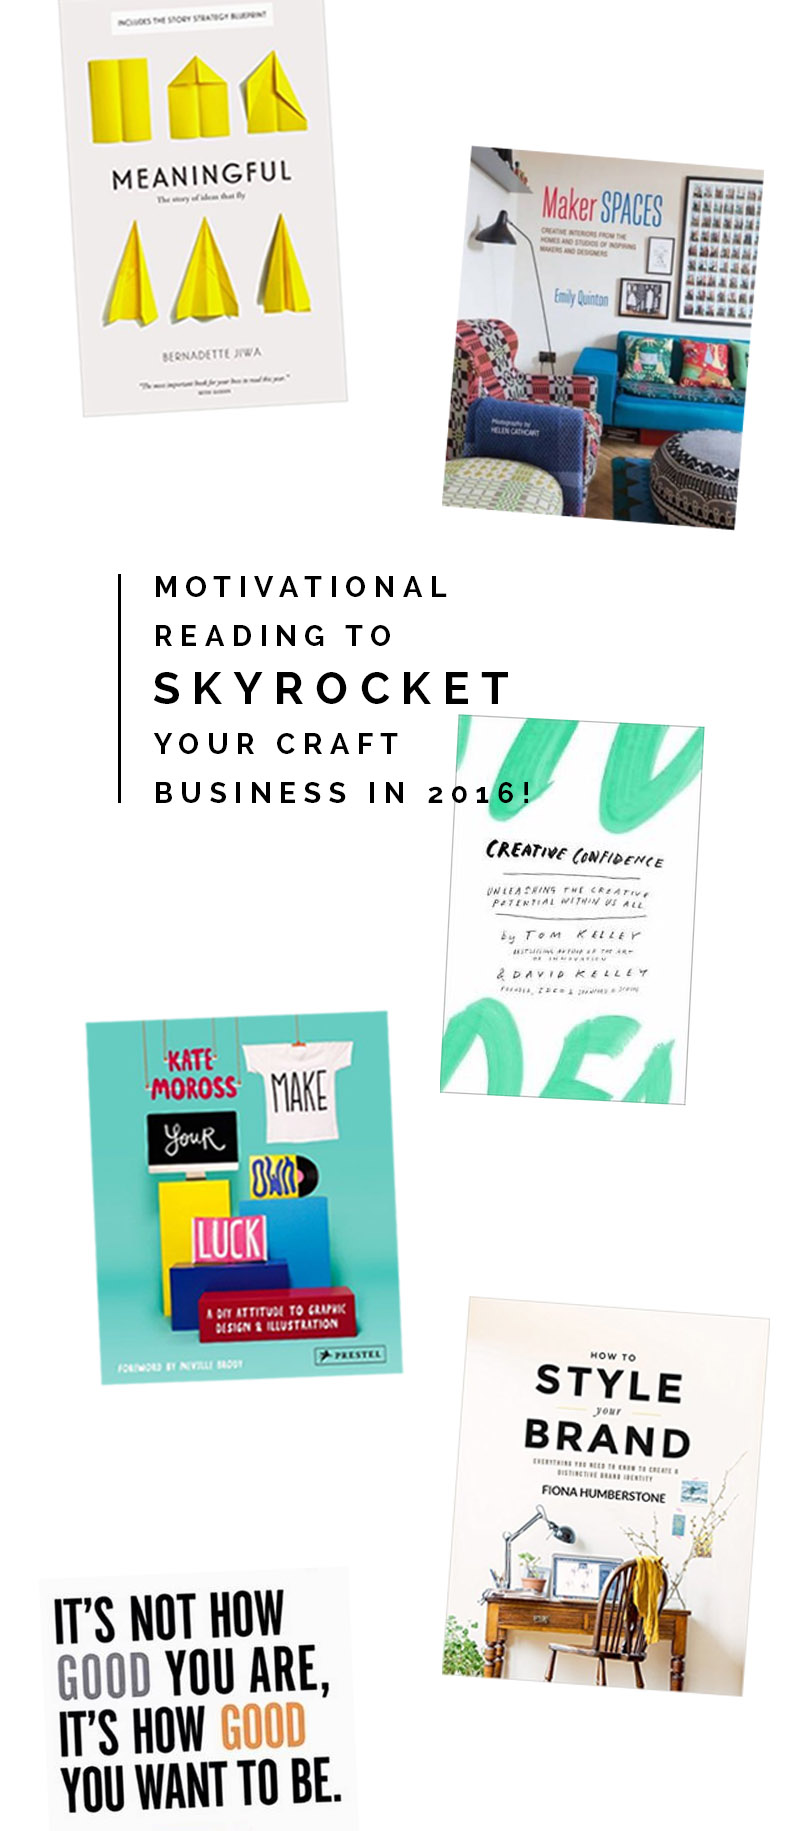 Motivational  reading to  SKYROCKET your Craft  Business in 2016!